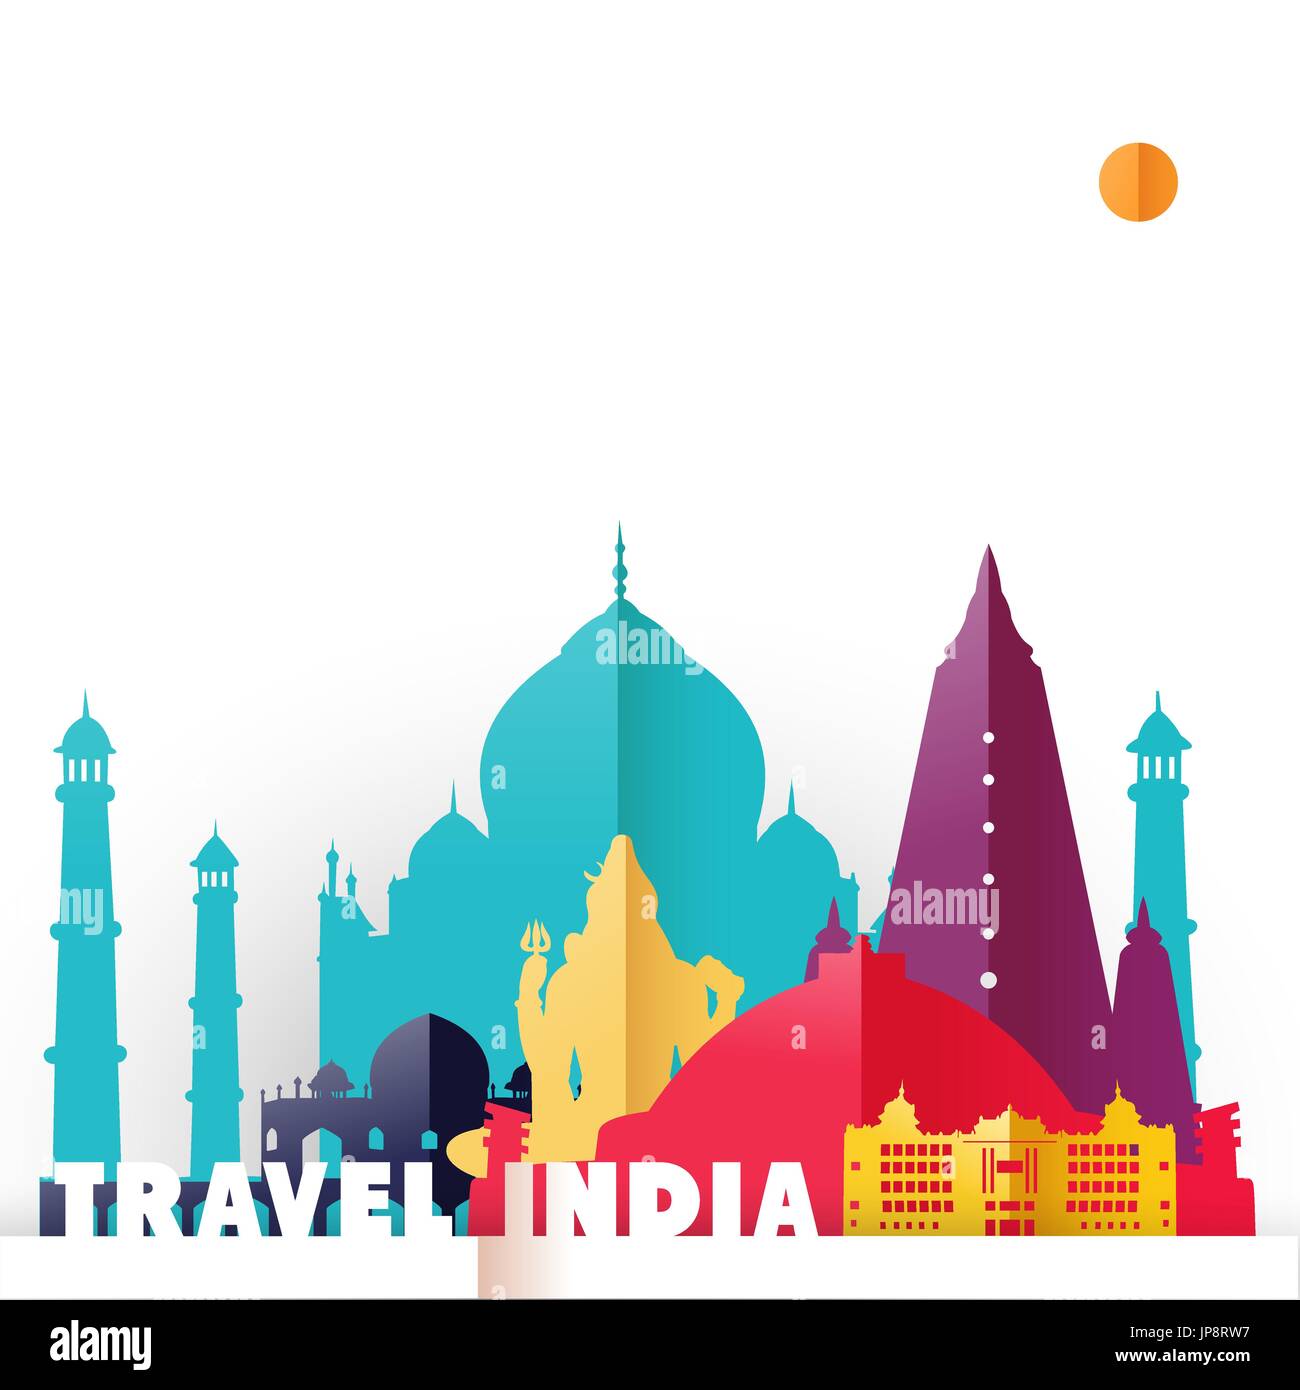 Travel India concept illustration in paper cut style, famous world landmarks of Indian country. Includes Taj Mahal, Shiva statue, Buddhist temples. EP Stock Vector